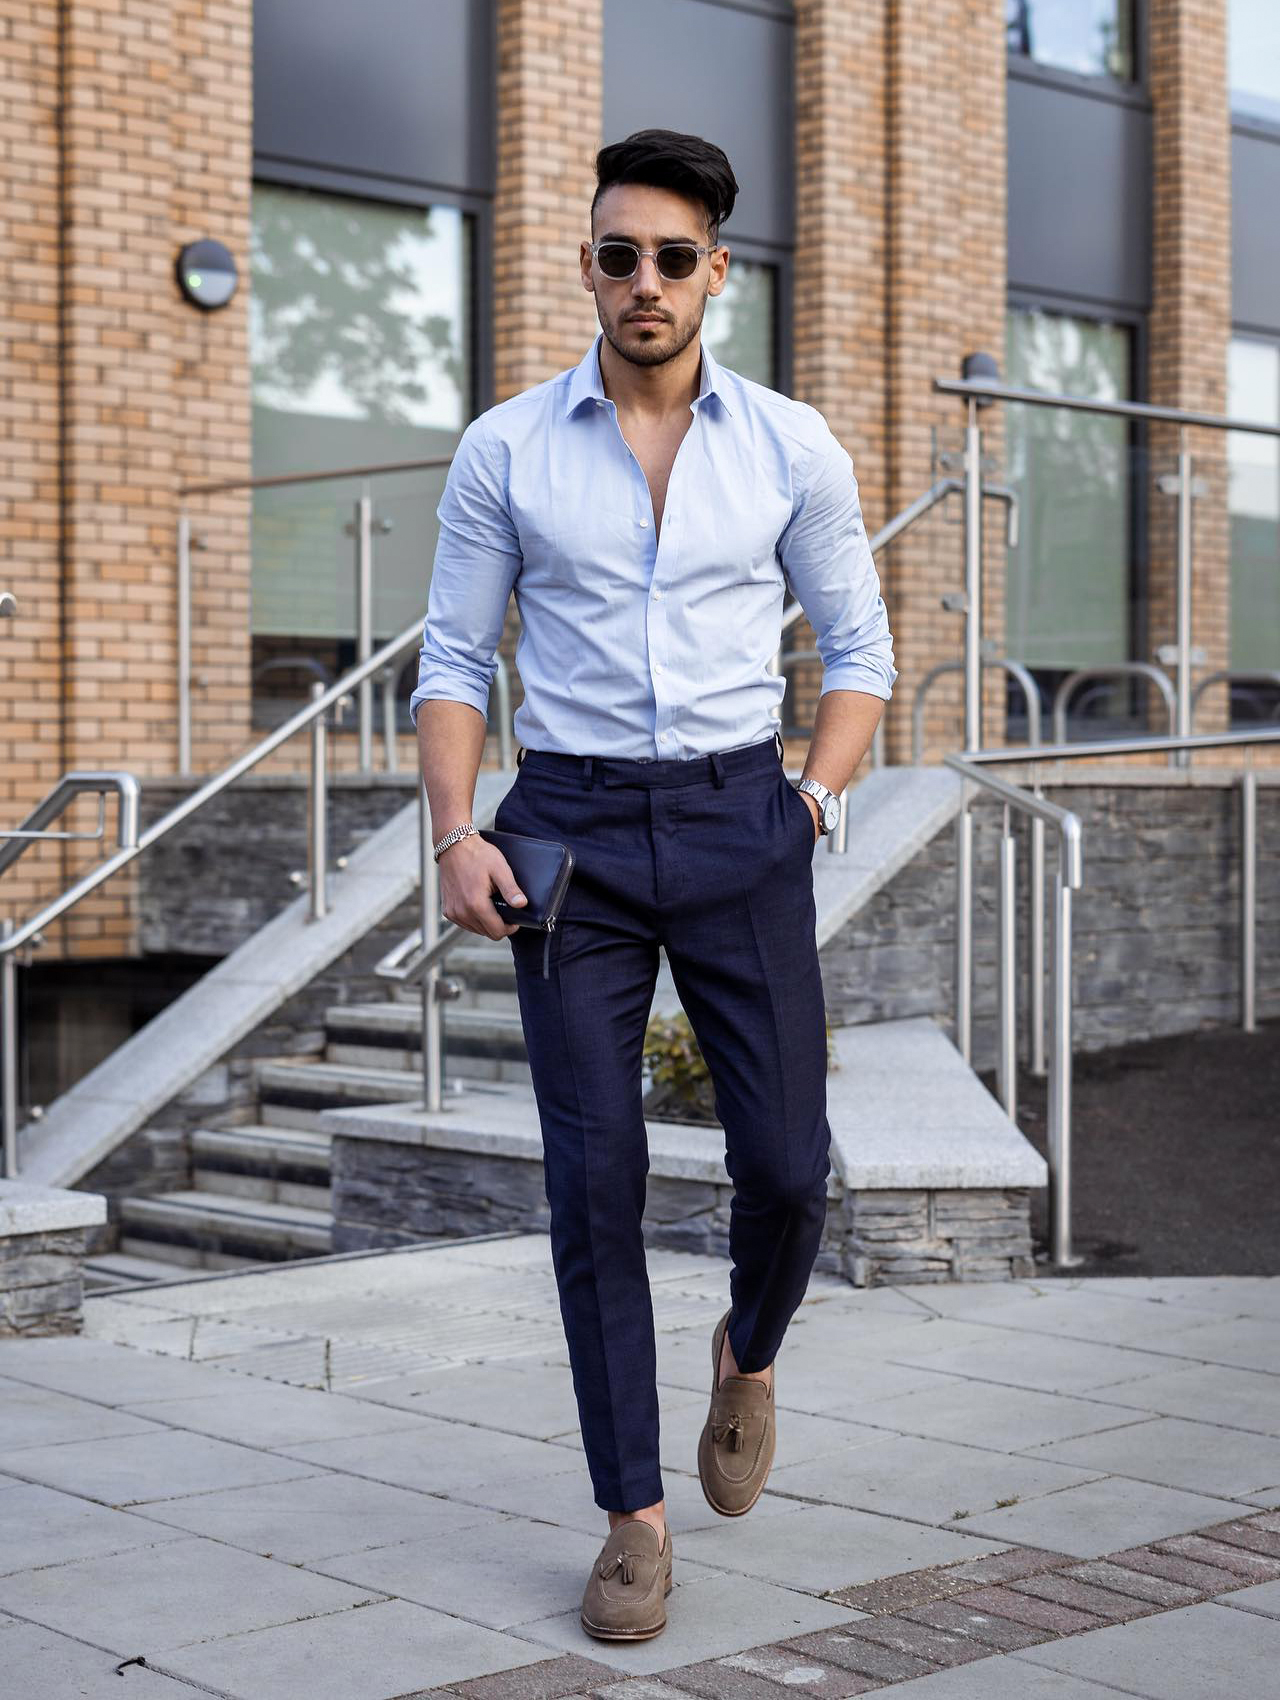 Blue shirt, navy dress pants, and tan tassel loafers